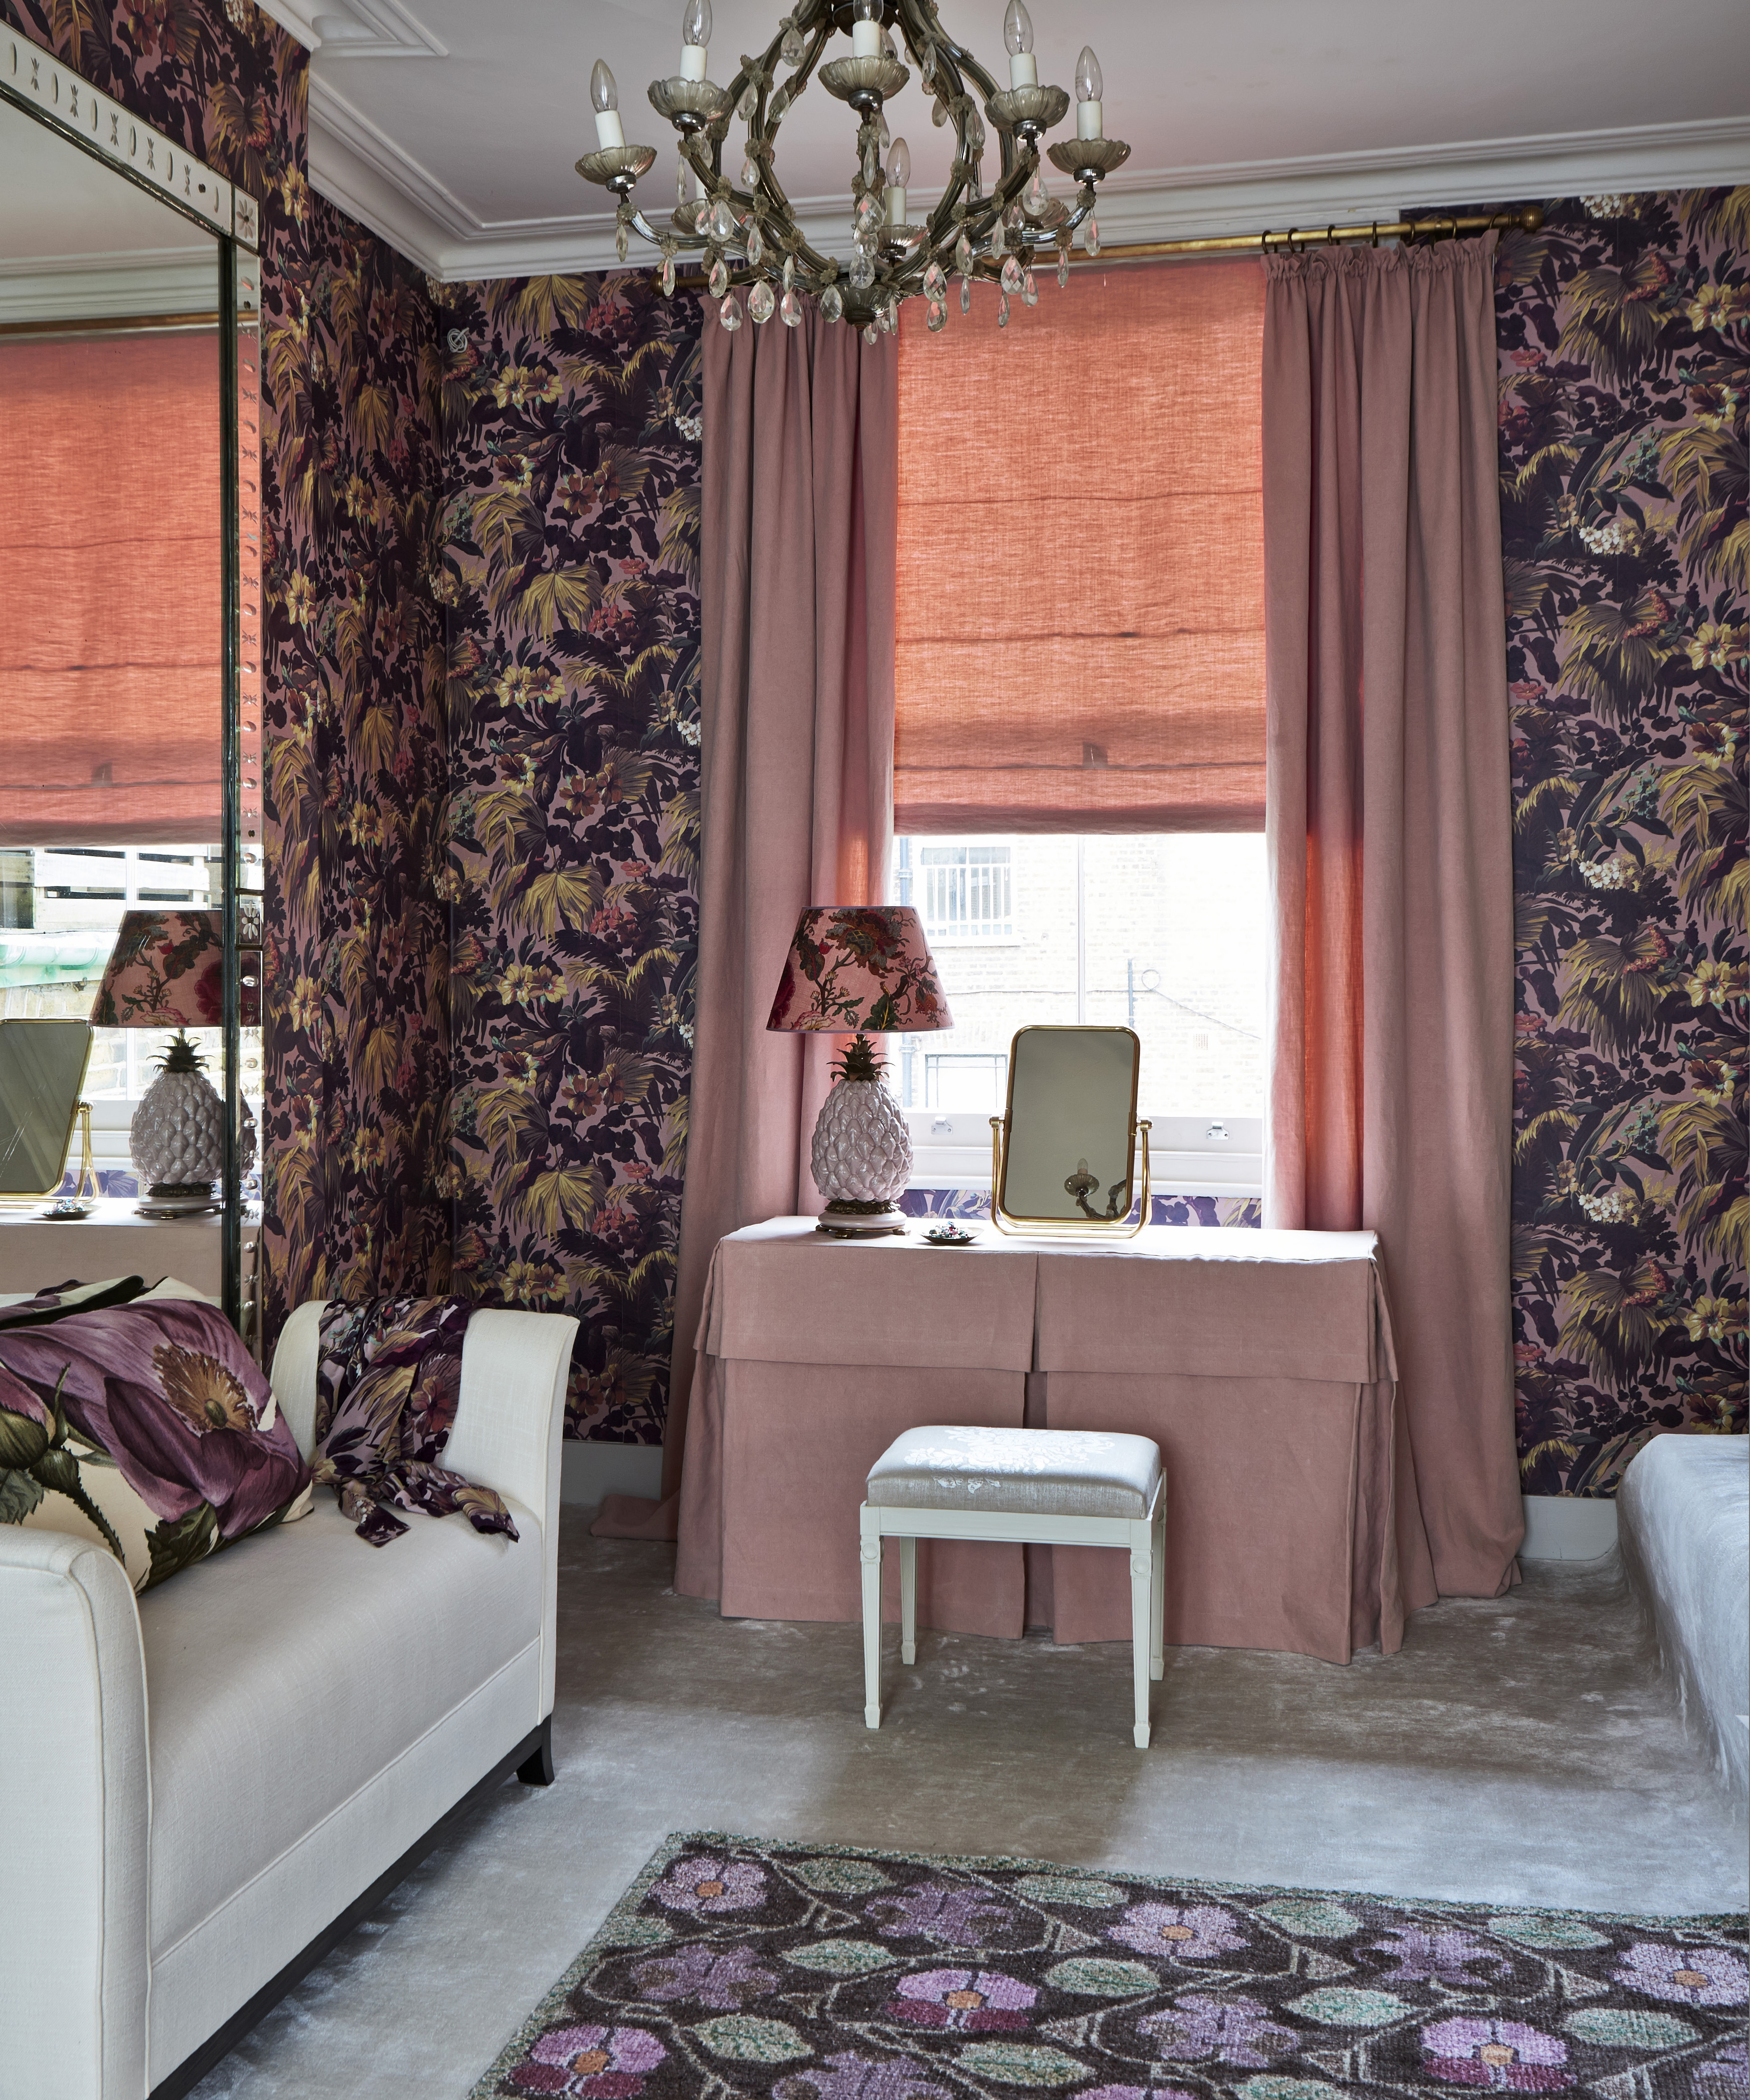 A bedroom with a pink dressing table and black floral wallpaper